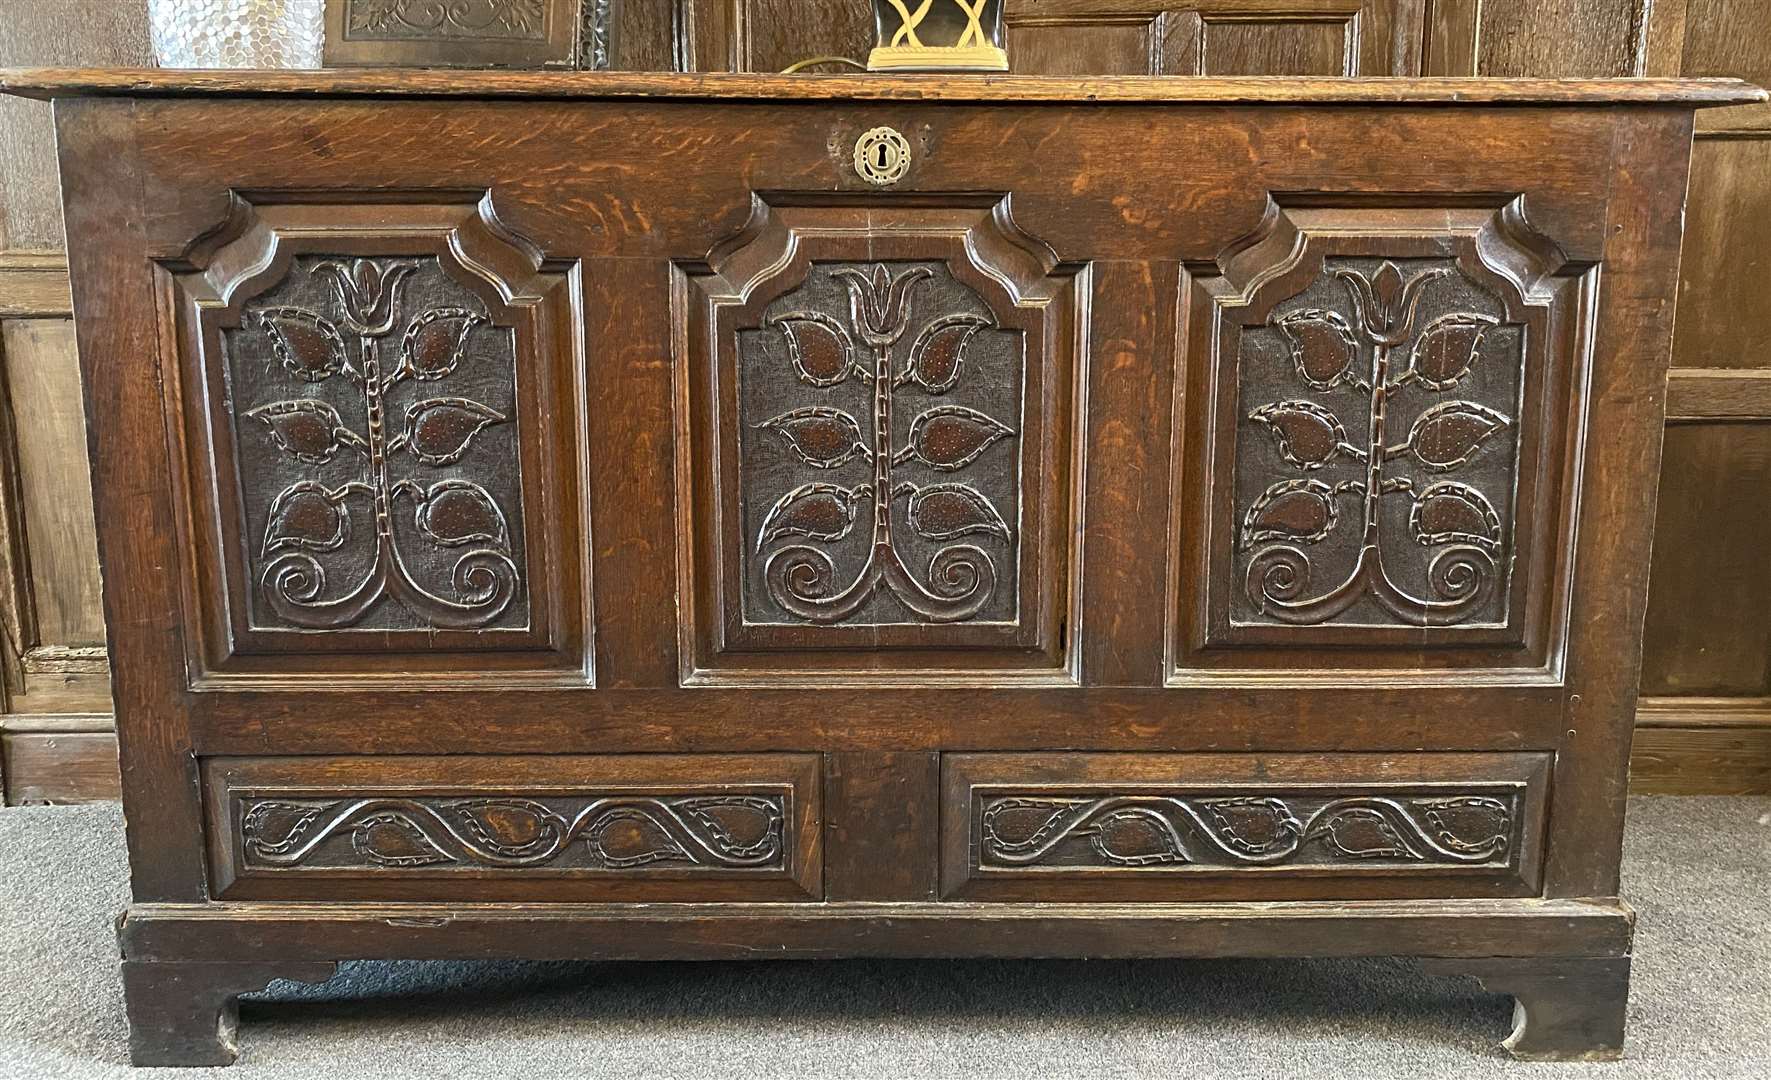 One of the oldest items in the property - a hand-carved oak coffer, which was once used to store bibles and blankets in the Medieval period